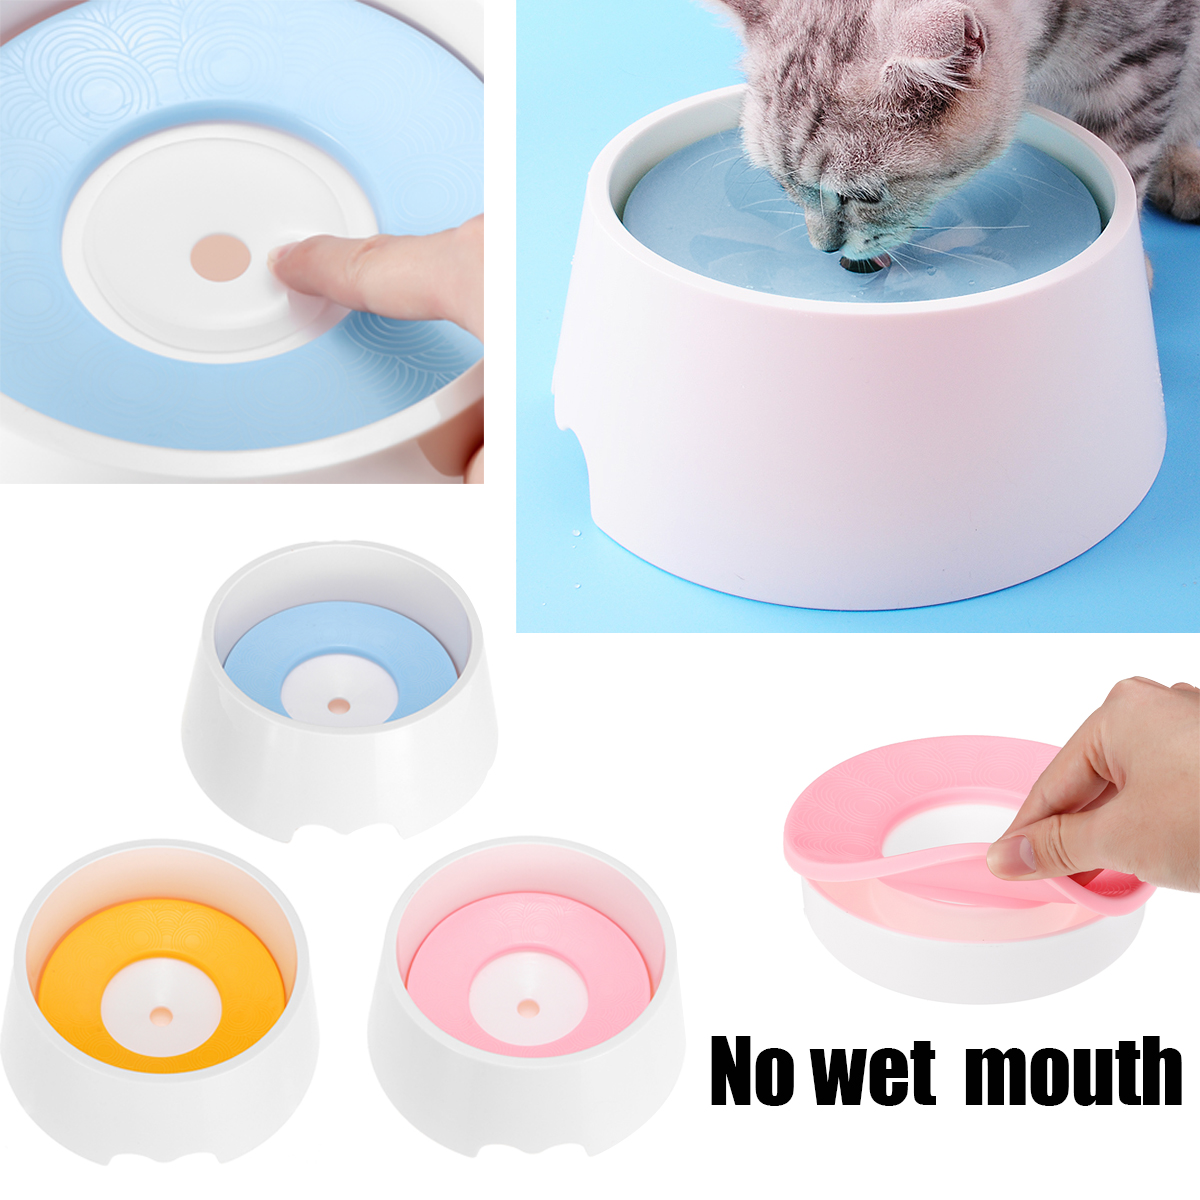 No-Wet-Mouth-and-Splash-Proof-Pet-Feeding-Puppy-Travel-Animal-Water-Bowl-1439667-4